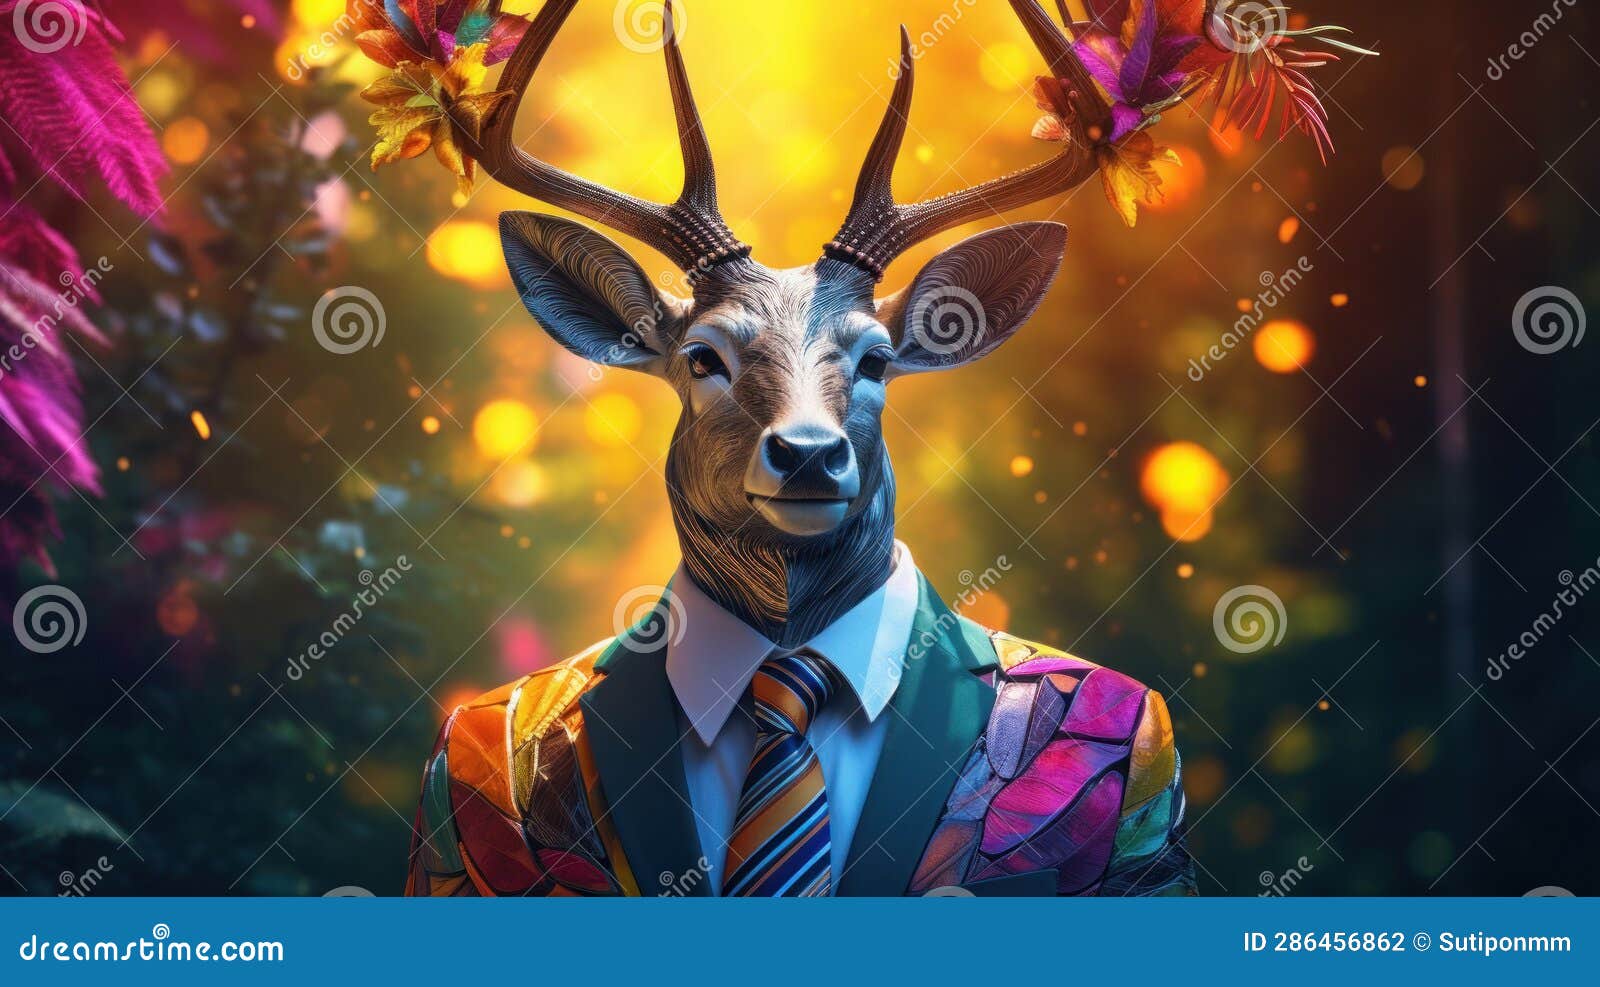 Deer Head and Horn Wearing Suit in the Forest Tropical DMT Styles ...